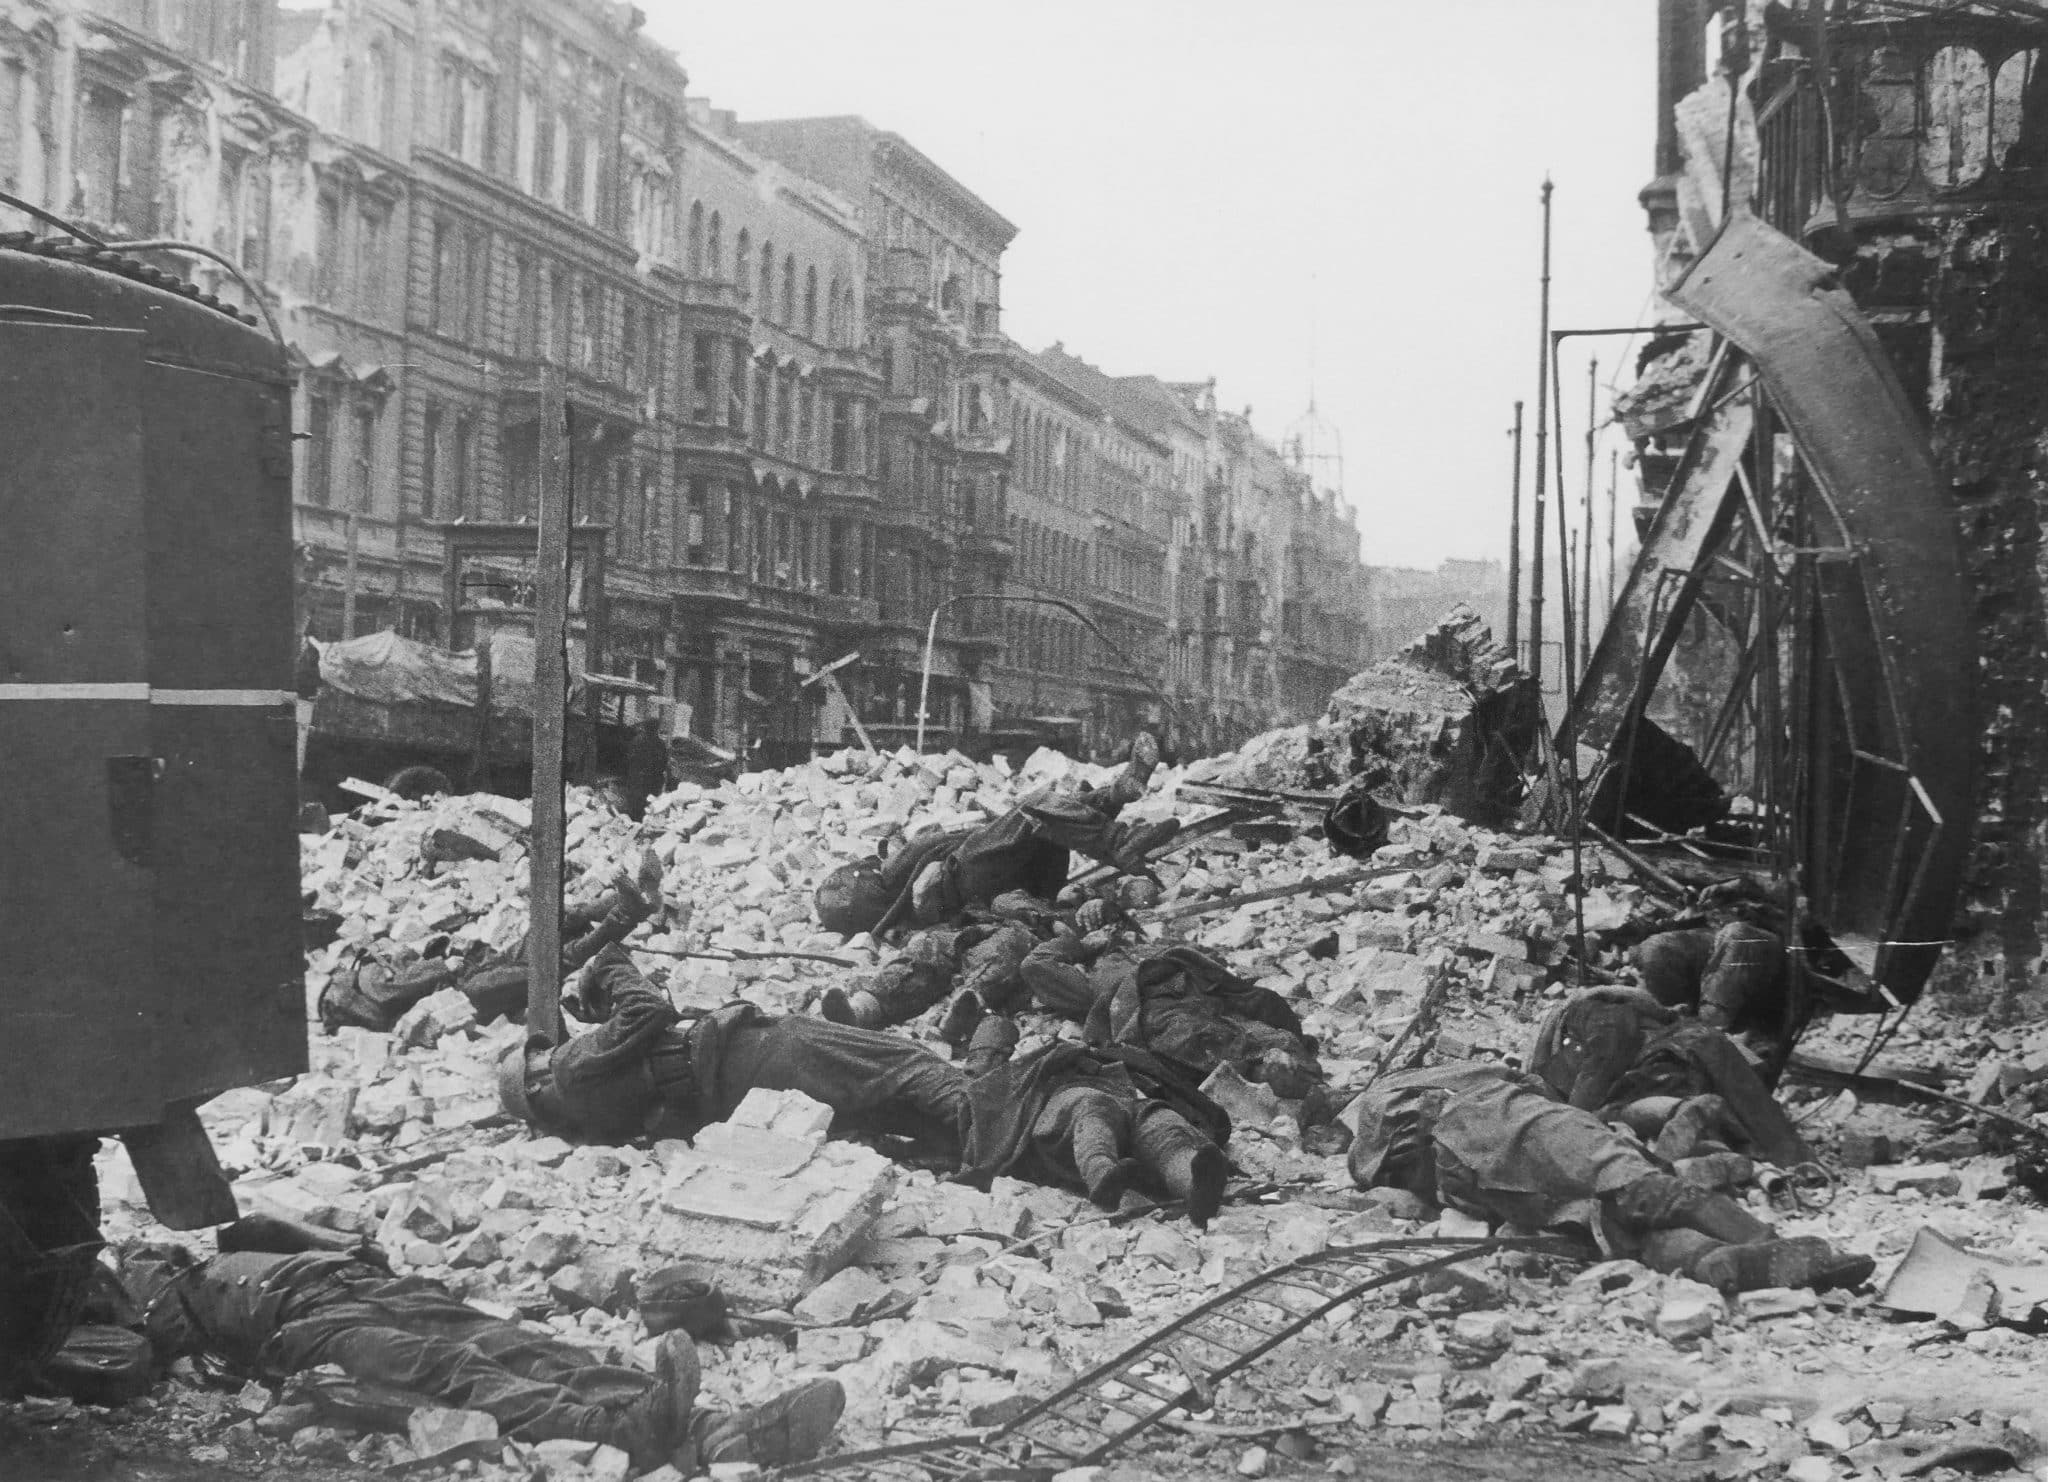 The remains of dead German soldiers on Friedrichstrasse following the Battle of Berlin 1945